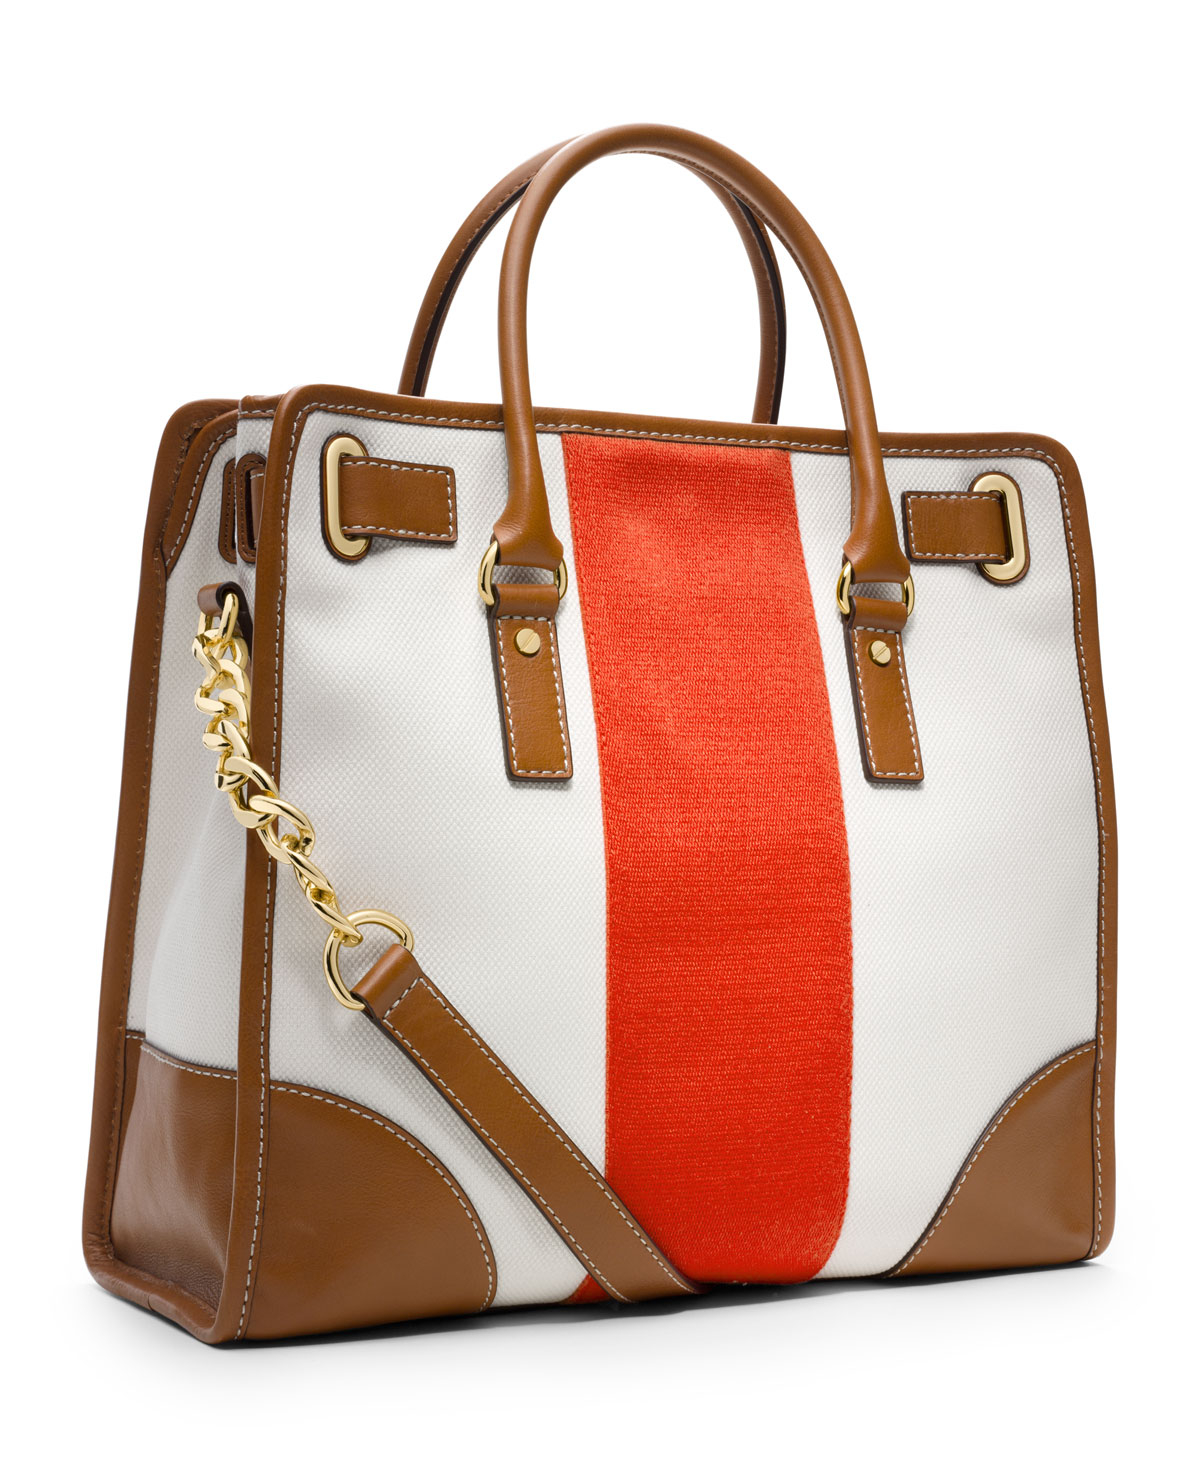 Lyst - Michael Michael Kors Large Hamilton Striped Canvas Tote in Brown